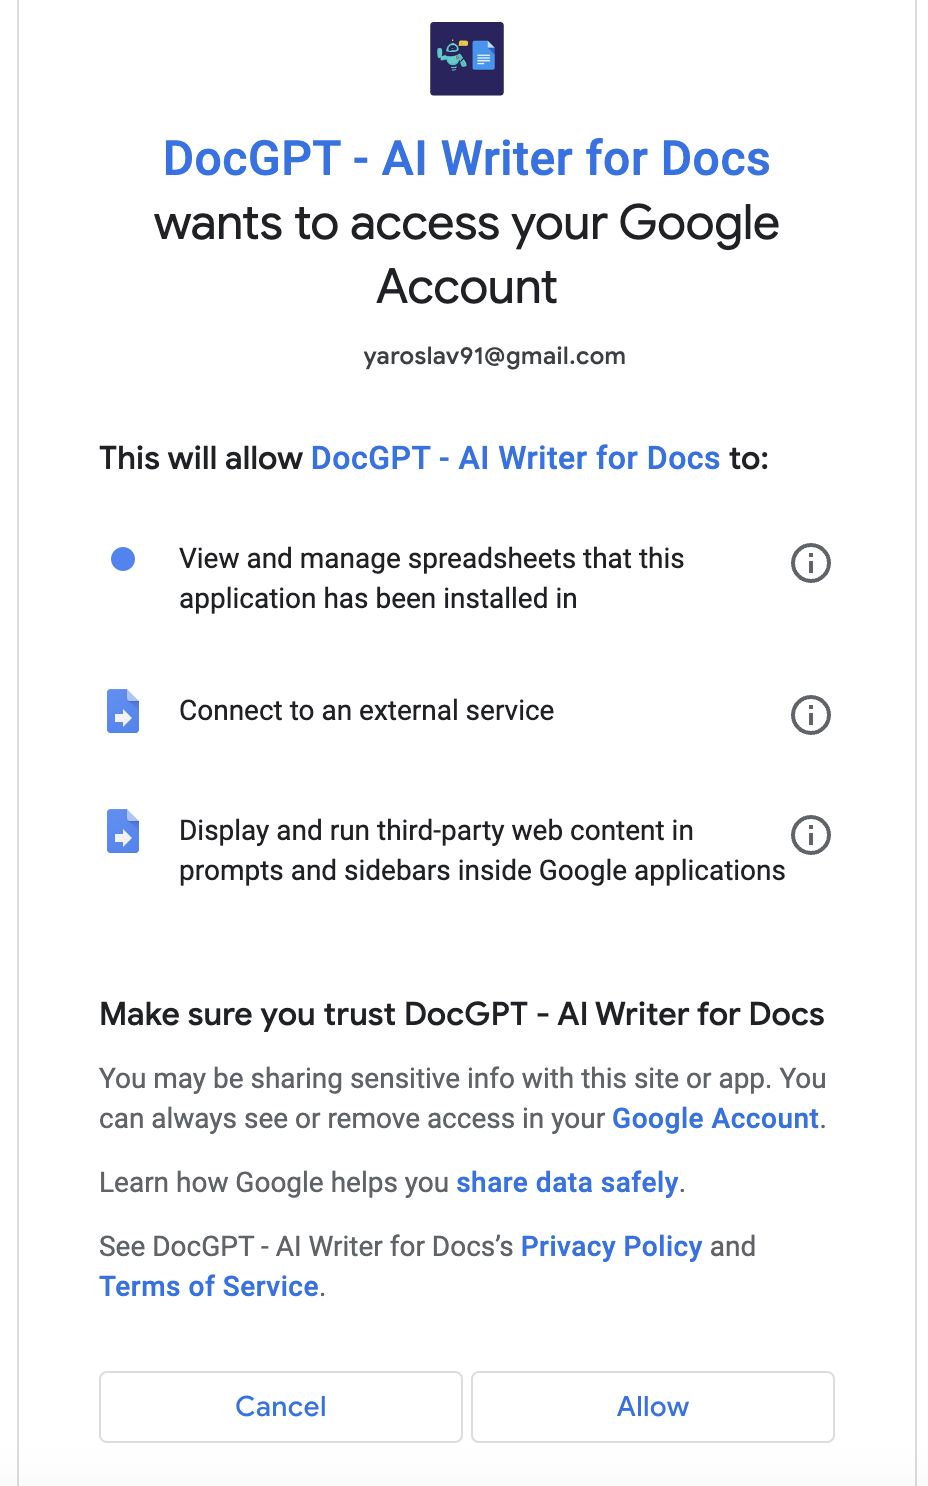 DocGPT - AI Writer for Docs